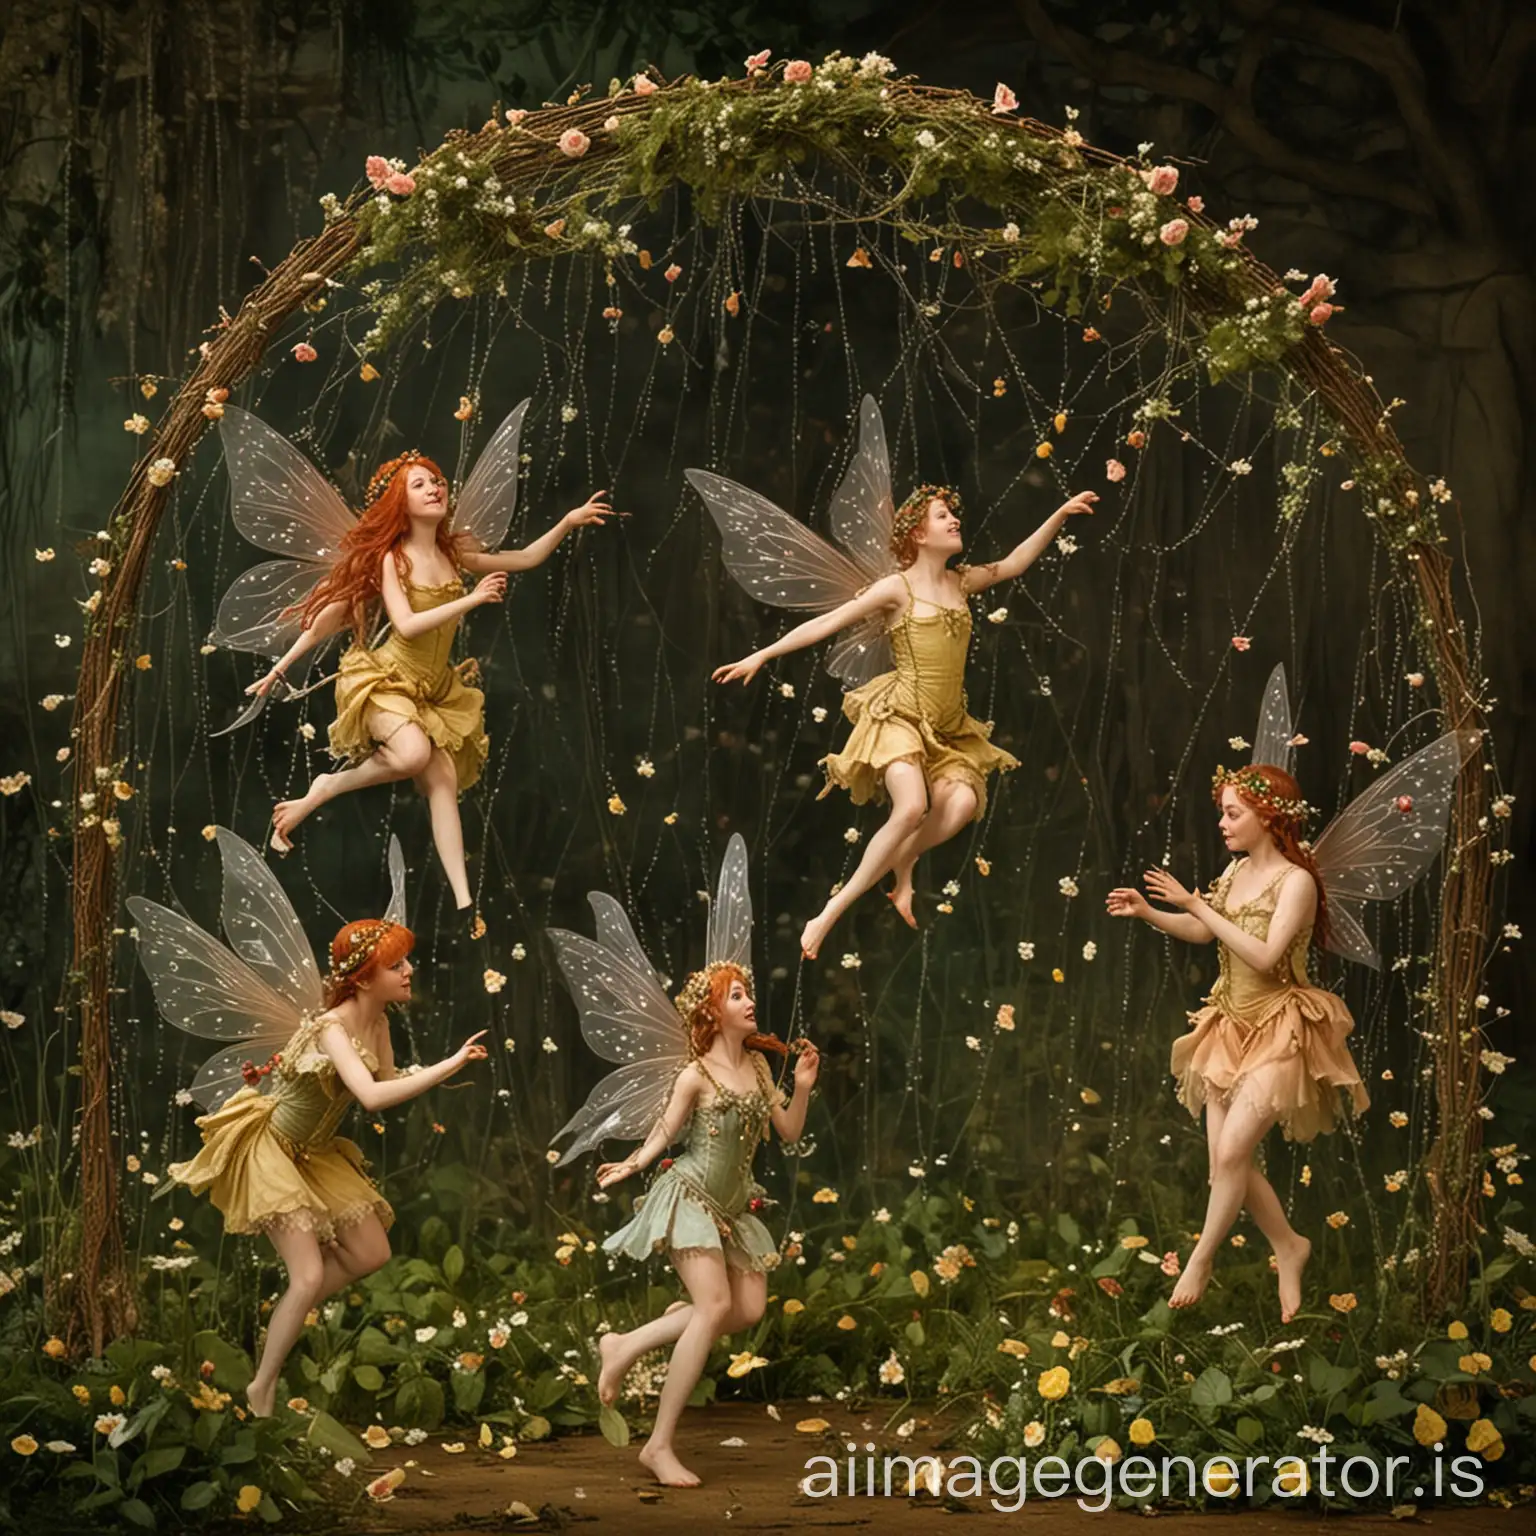 Peaseblossom, Cobweb, Mote, and Mustardseed ,the fairies ordered by Titania to attend to Bottom after she falls in love with him.

